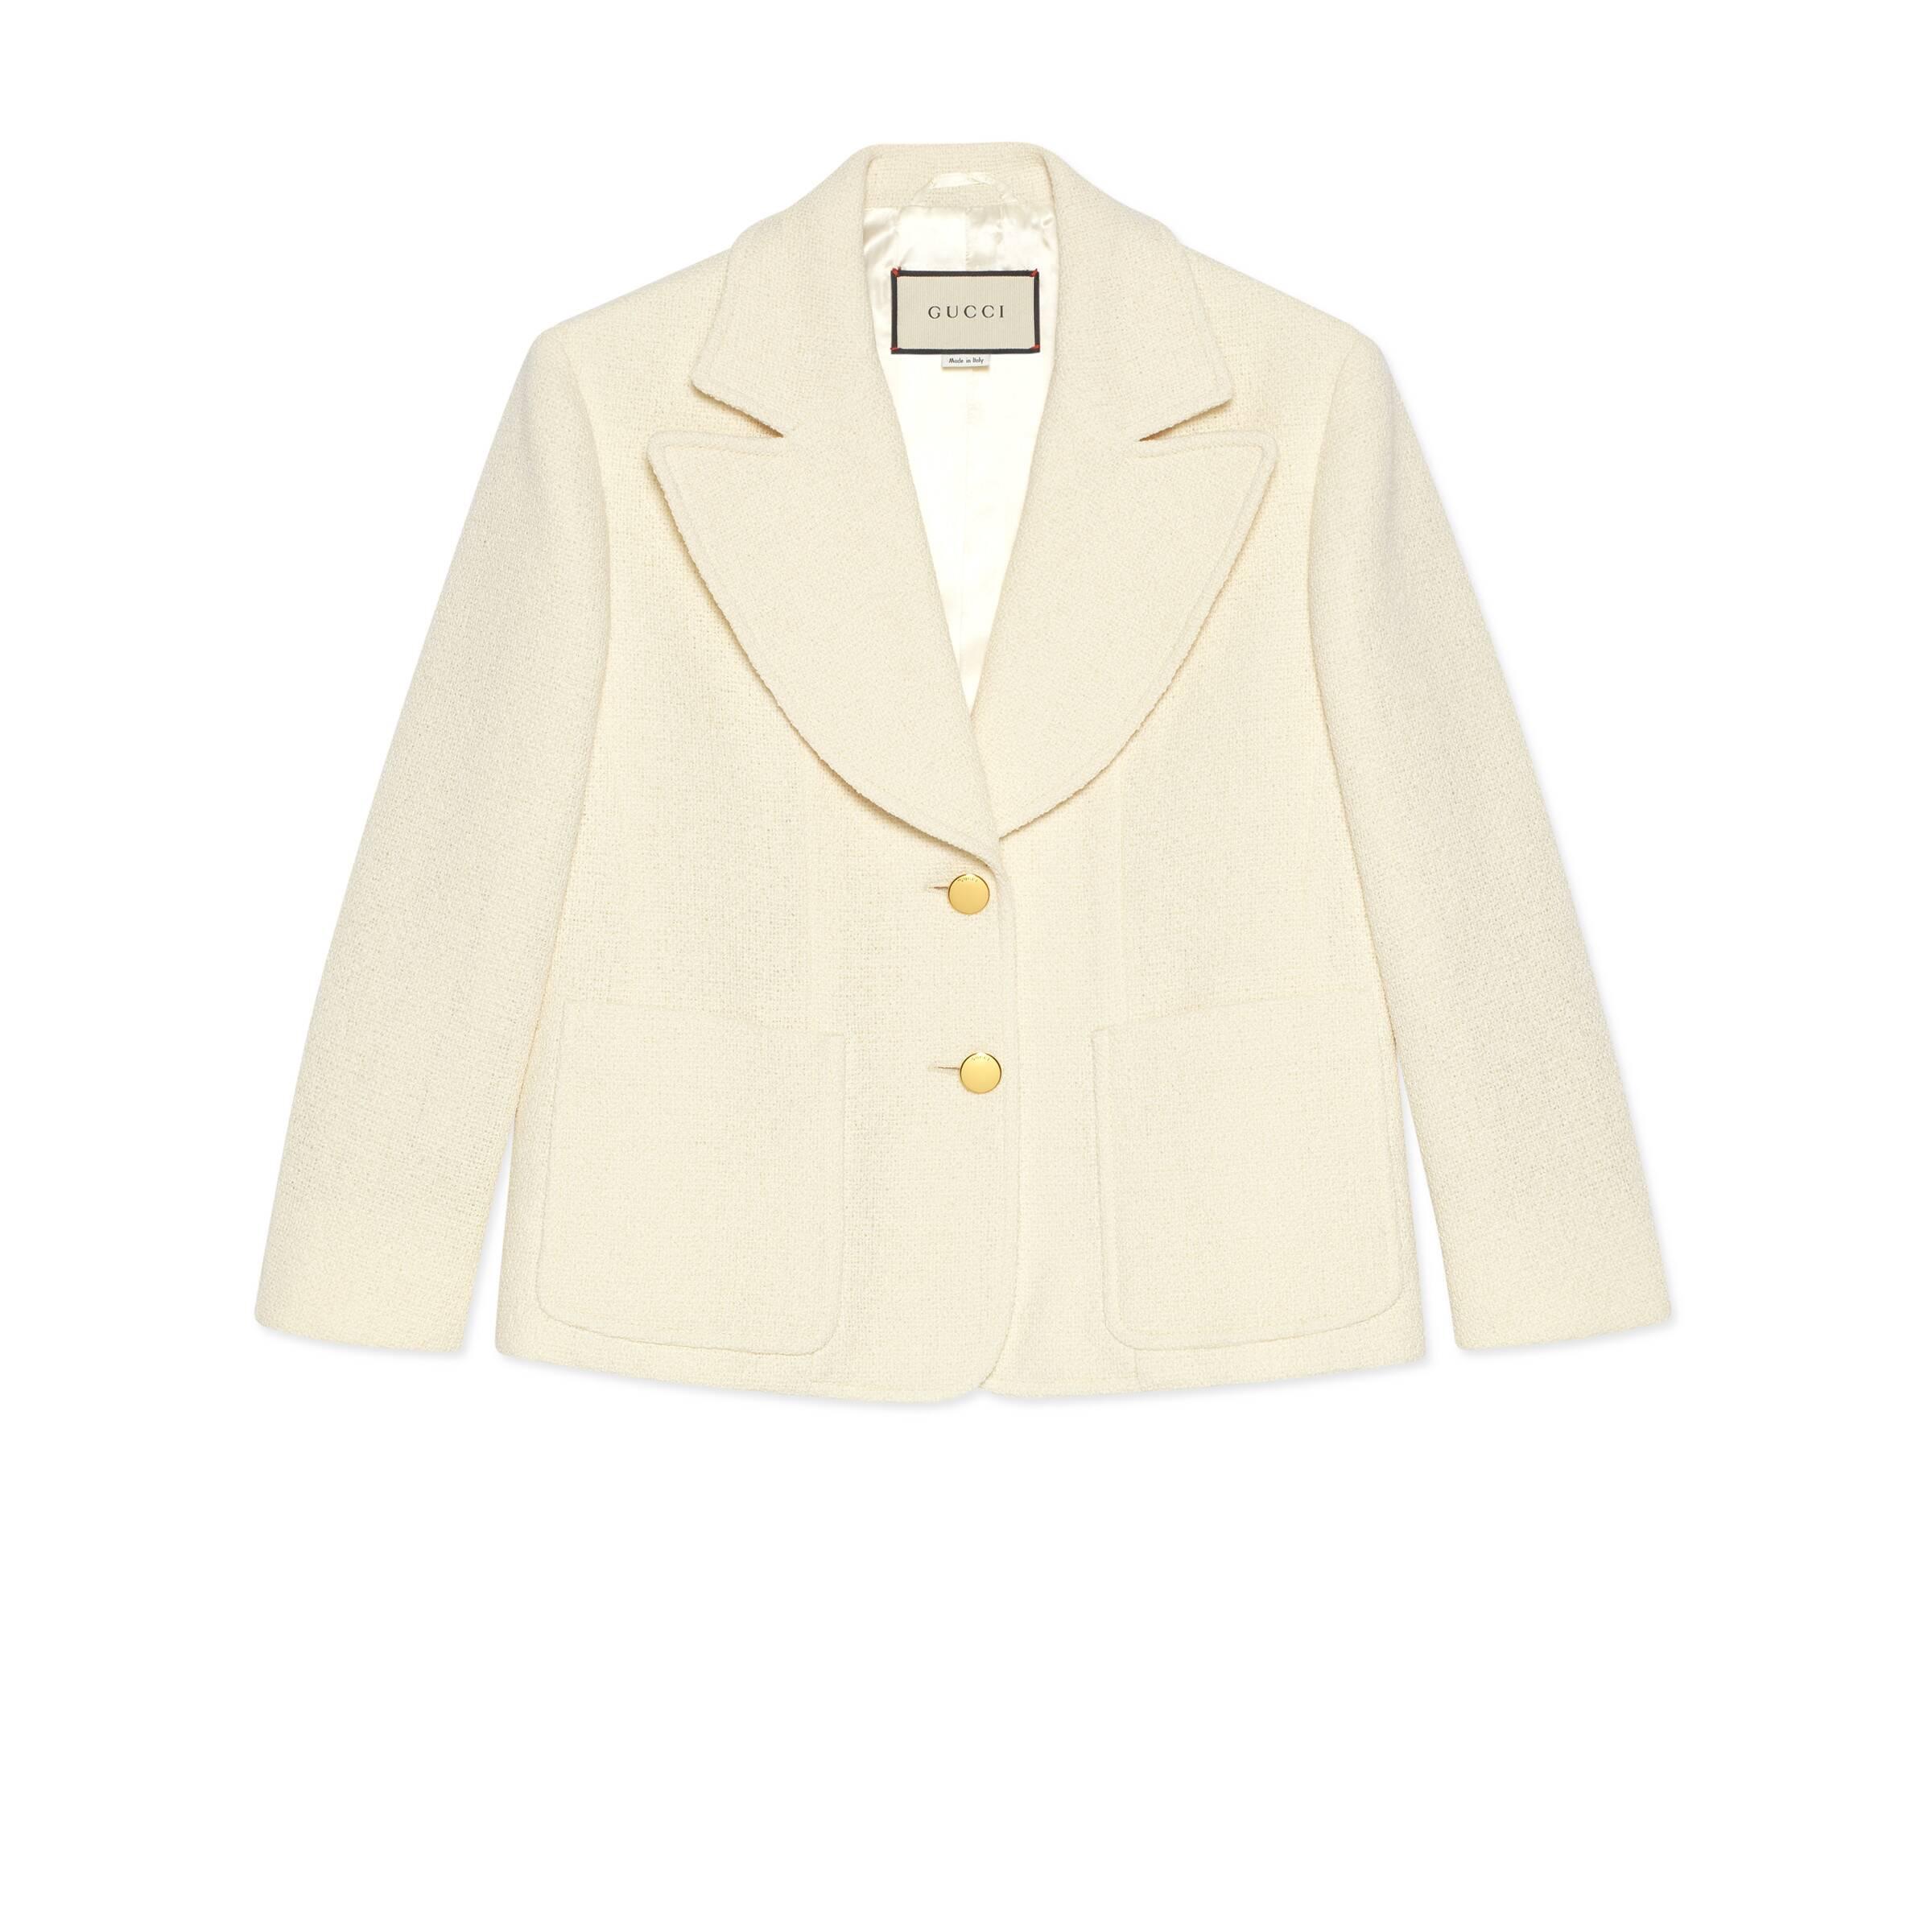 Gucci Retro Inspired Tweed Jacket in White | Lyst